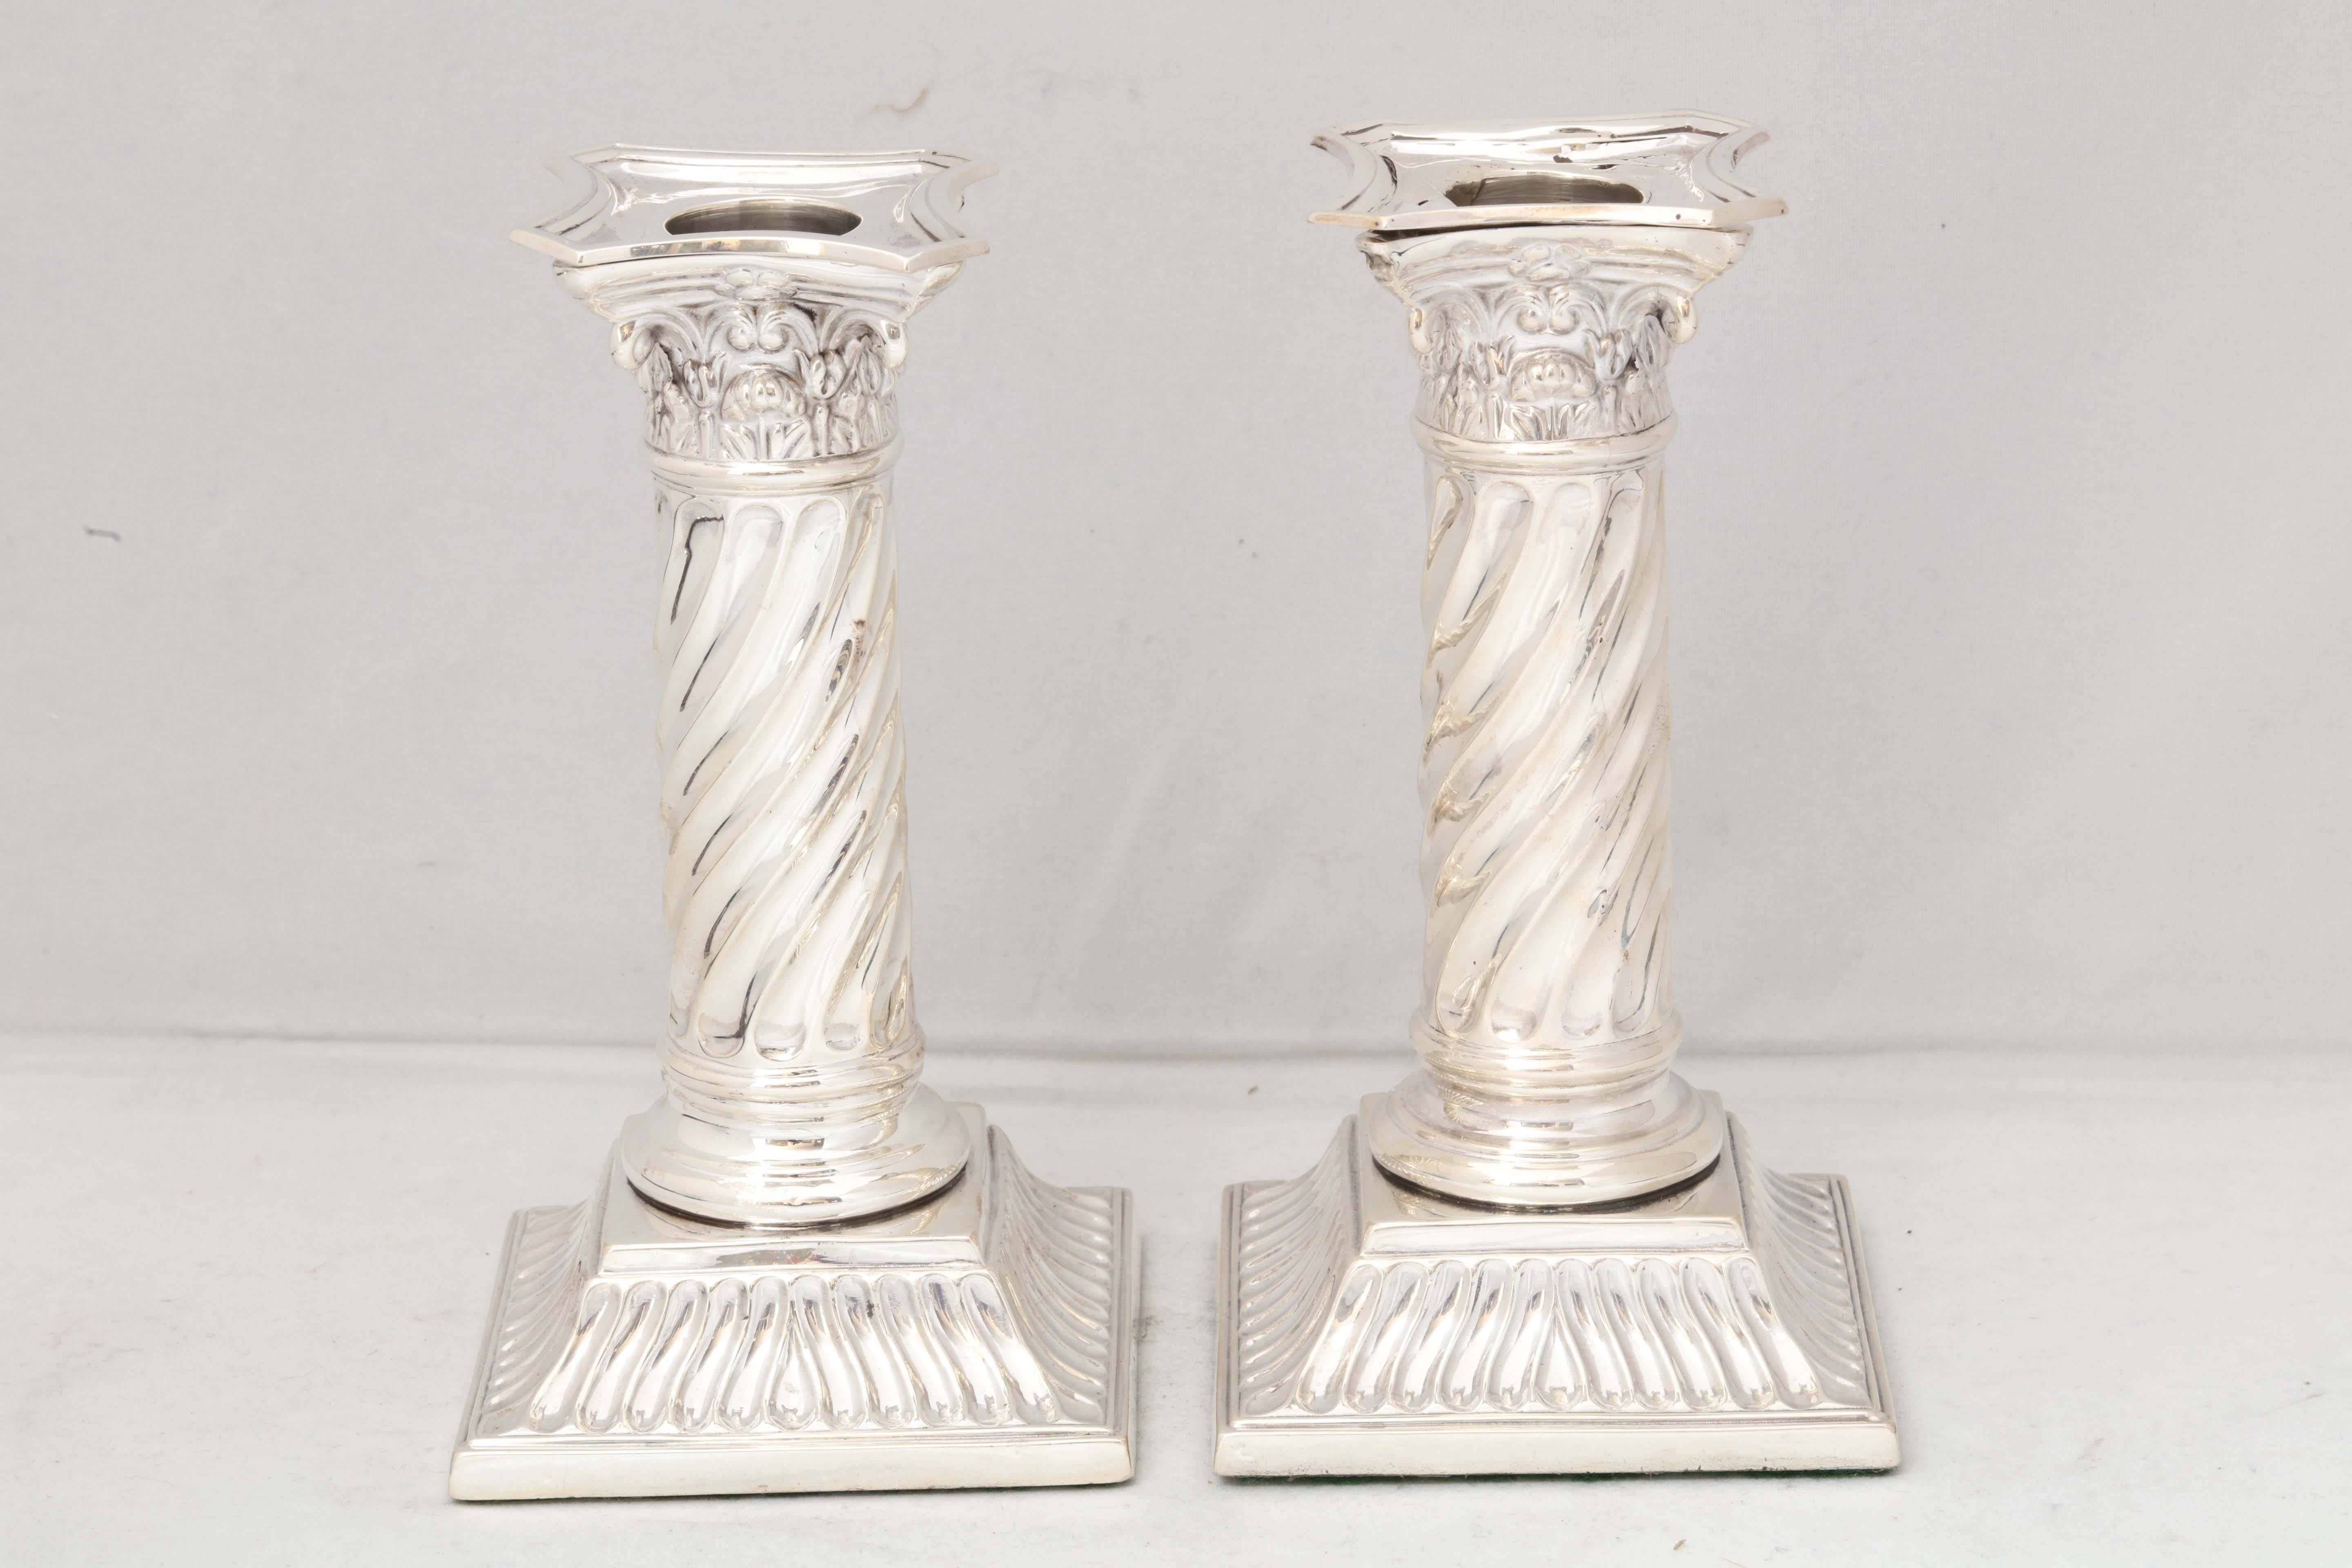 Unusual pair of sterling silver, Victorian, Neoclassical, column-form candlesticks, Sheffield, England, 1899, Martin and Hall - makers. Columns are spiral in design. Removable bobeches. Each measures 6 inches high x 3 1/4 inches wide x 3 1/4 inches